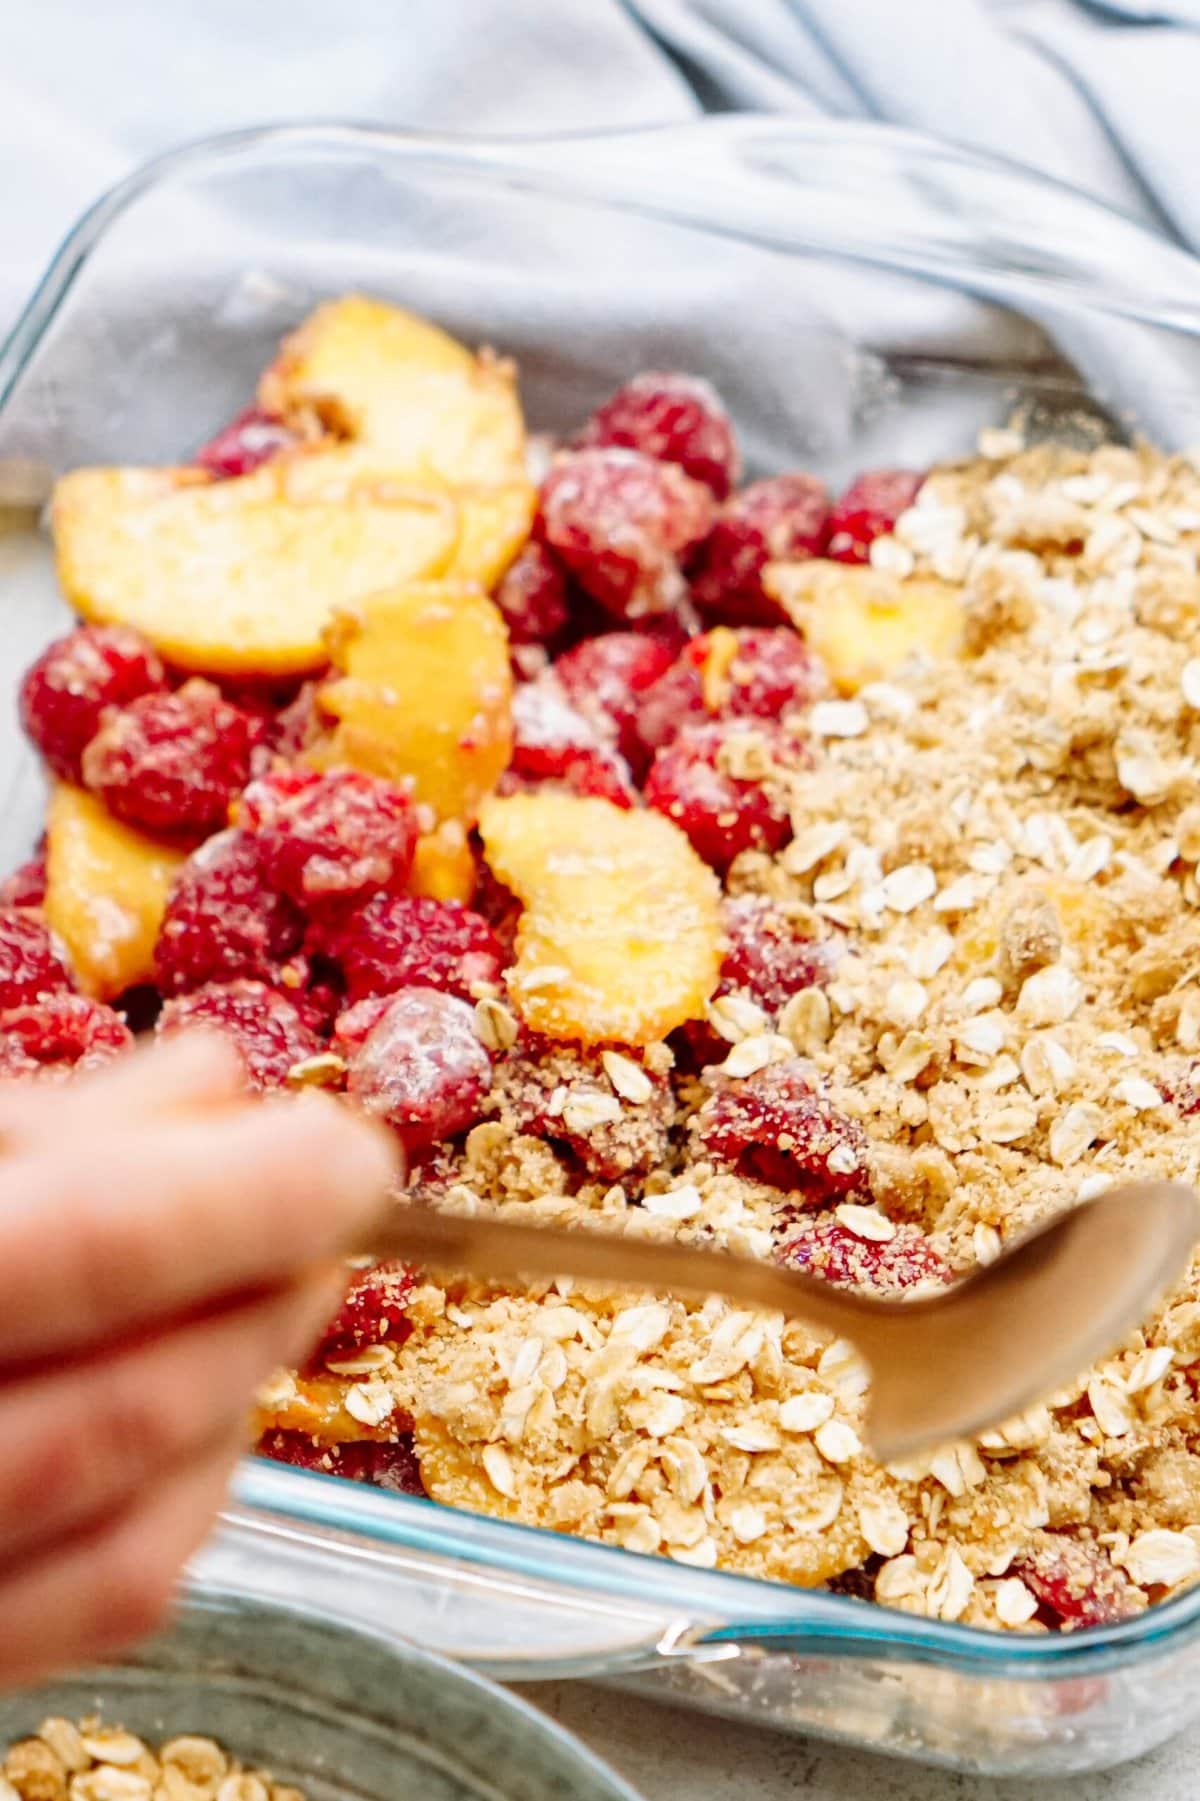 A hand holding a spoon is shown near a glass baking dish containing peach and raspberry cobbler topped with oats and a crumbly brown sugar mixture.